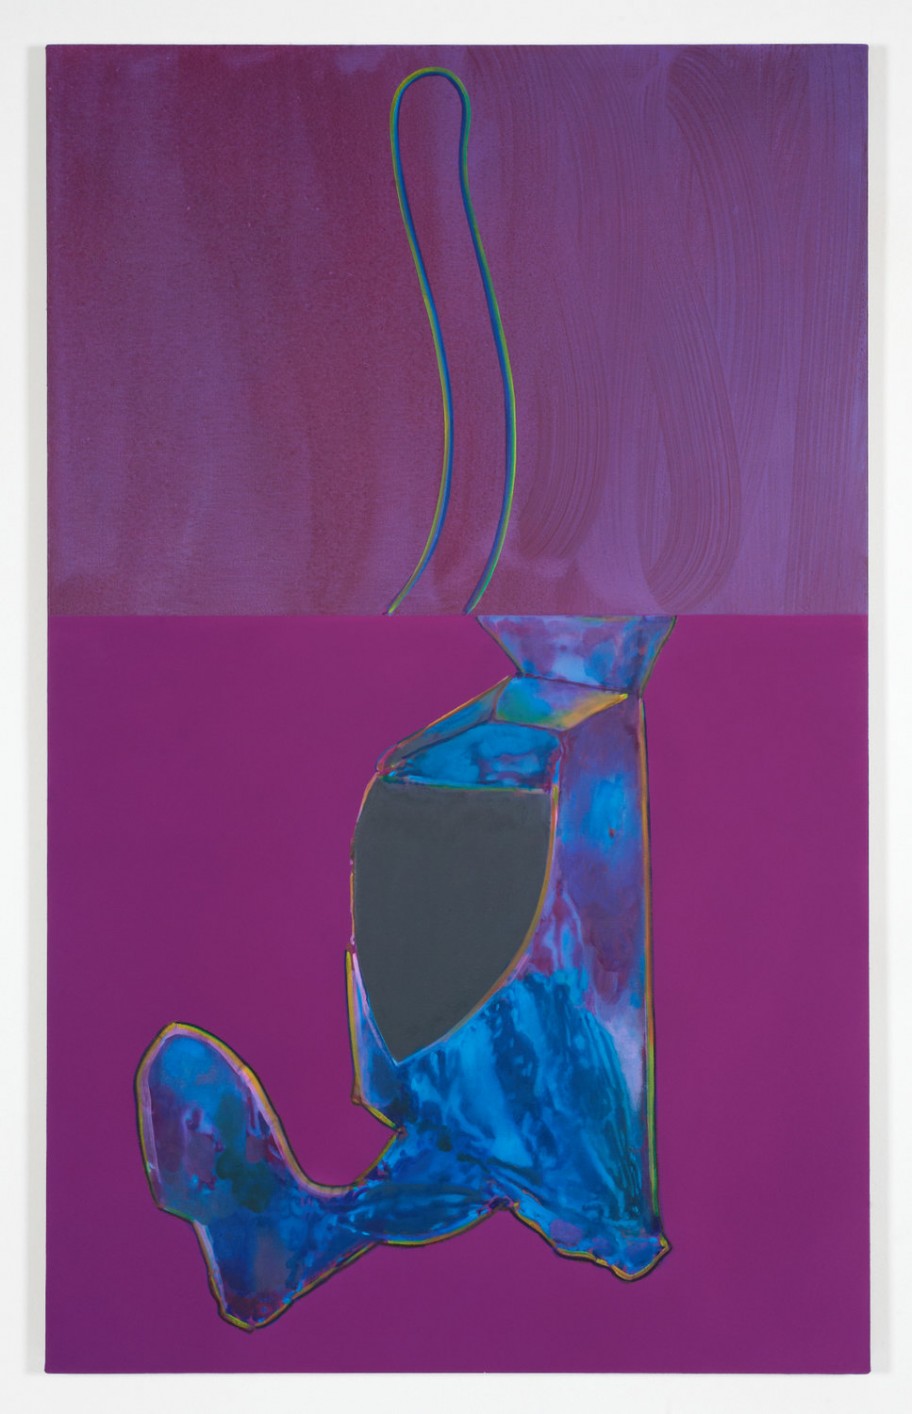 Milena Dragicevic From the Pampero Series (Juta), 2012oil and acrylic on linen 148 x 91,5 cm 